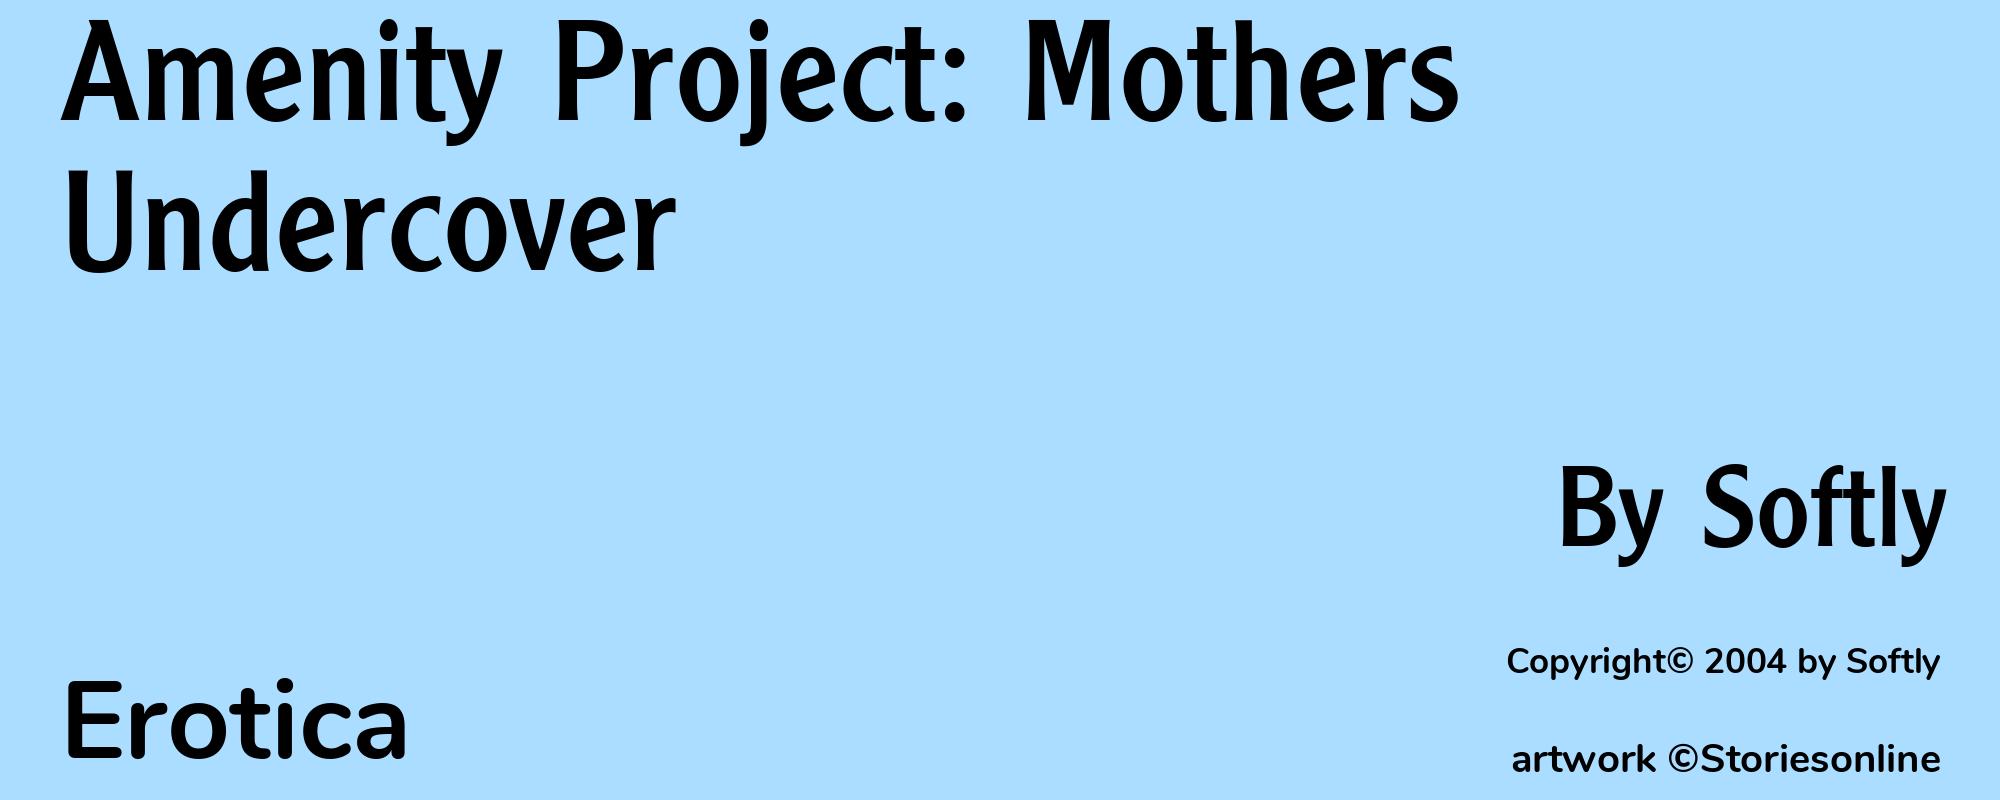 Amenity Project: Mothers Undercover - Cover